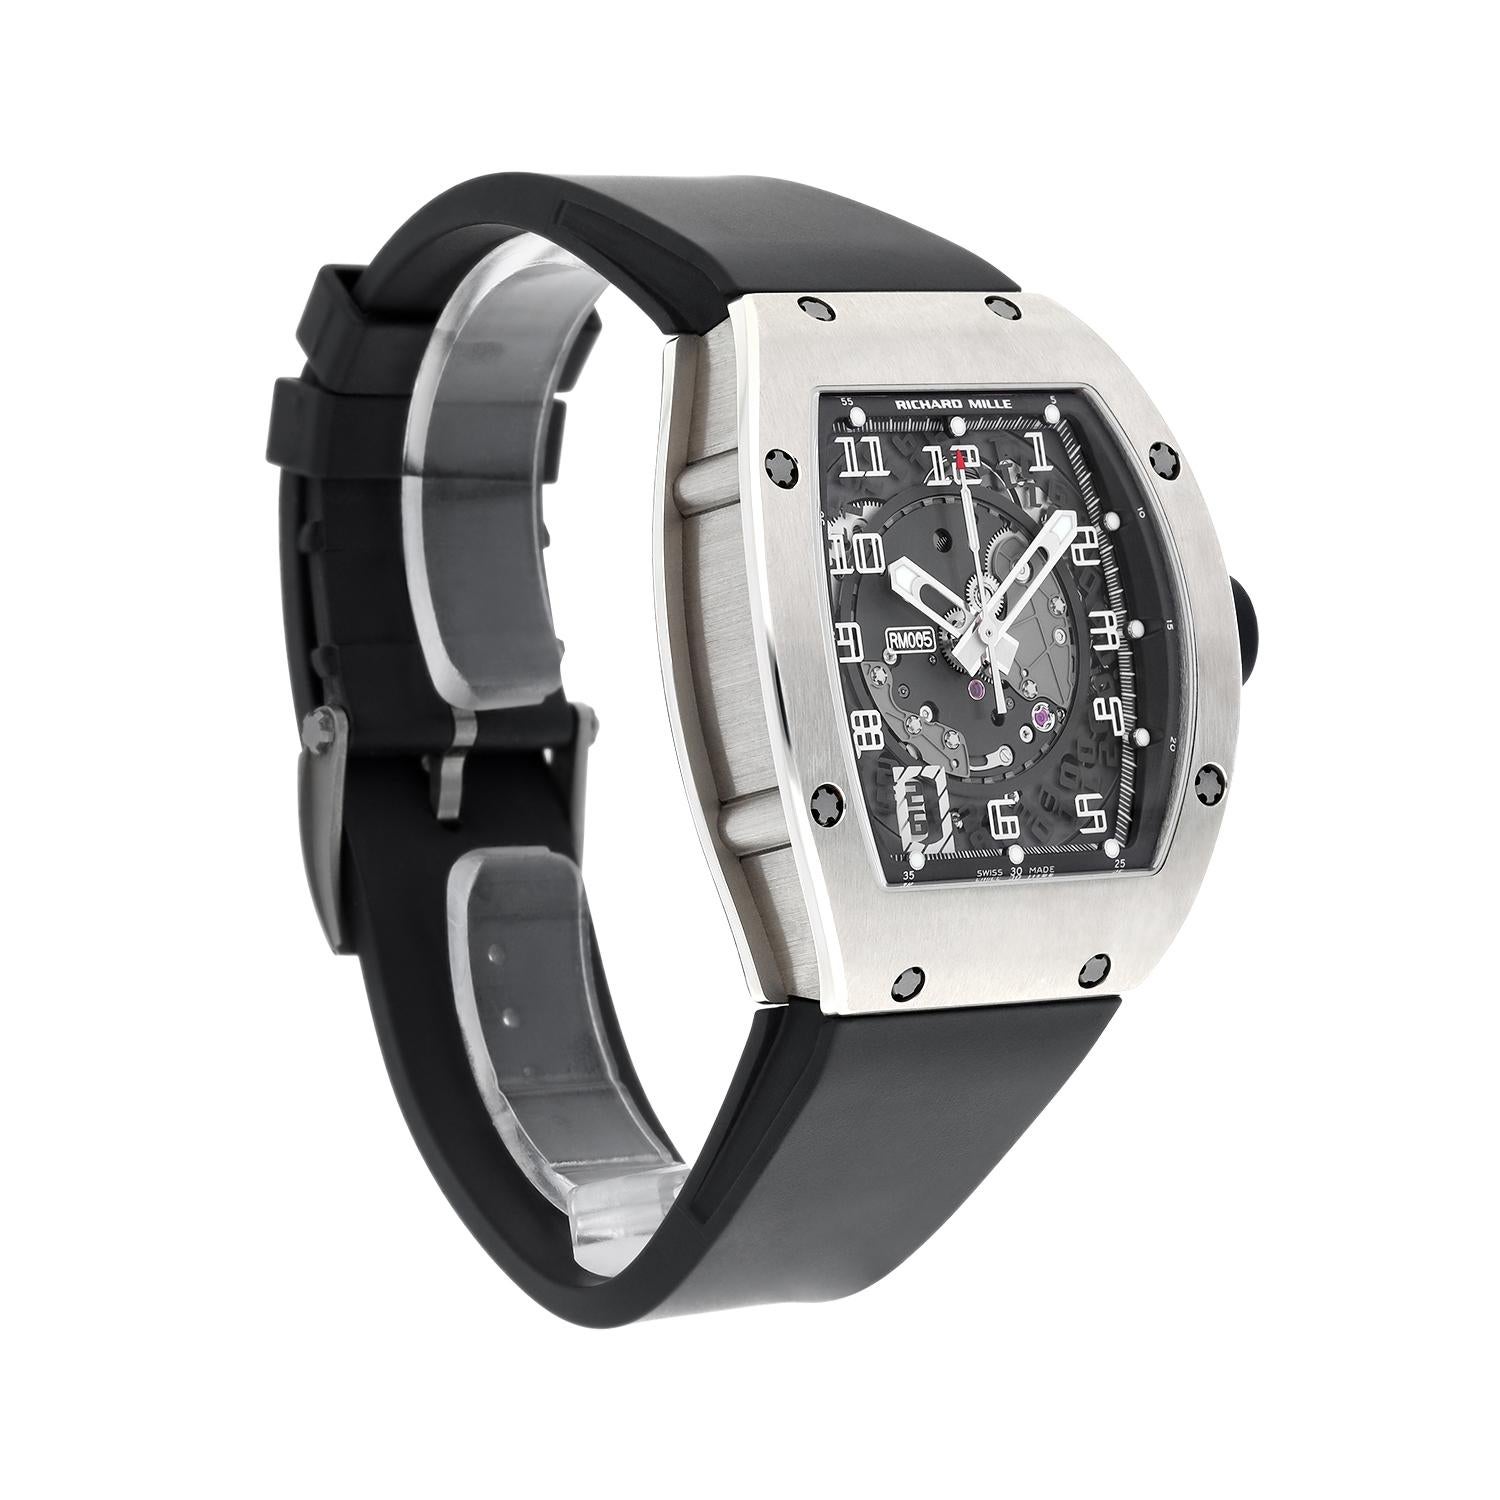 Richard Mille RM 005 Manual Wind White Gold Mens Watch Rubber Band Complete en vente 1